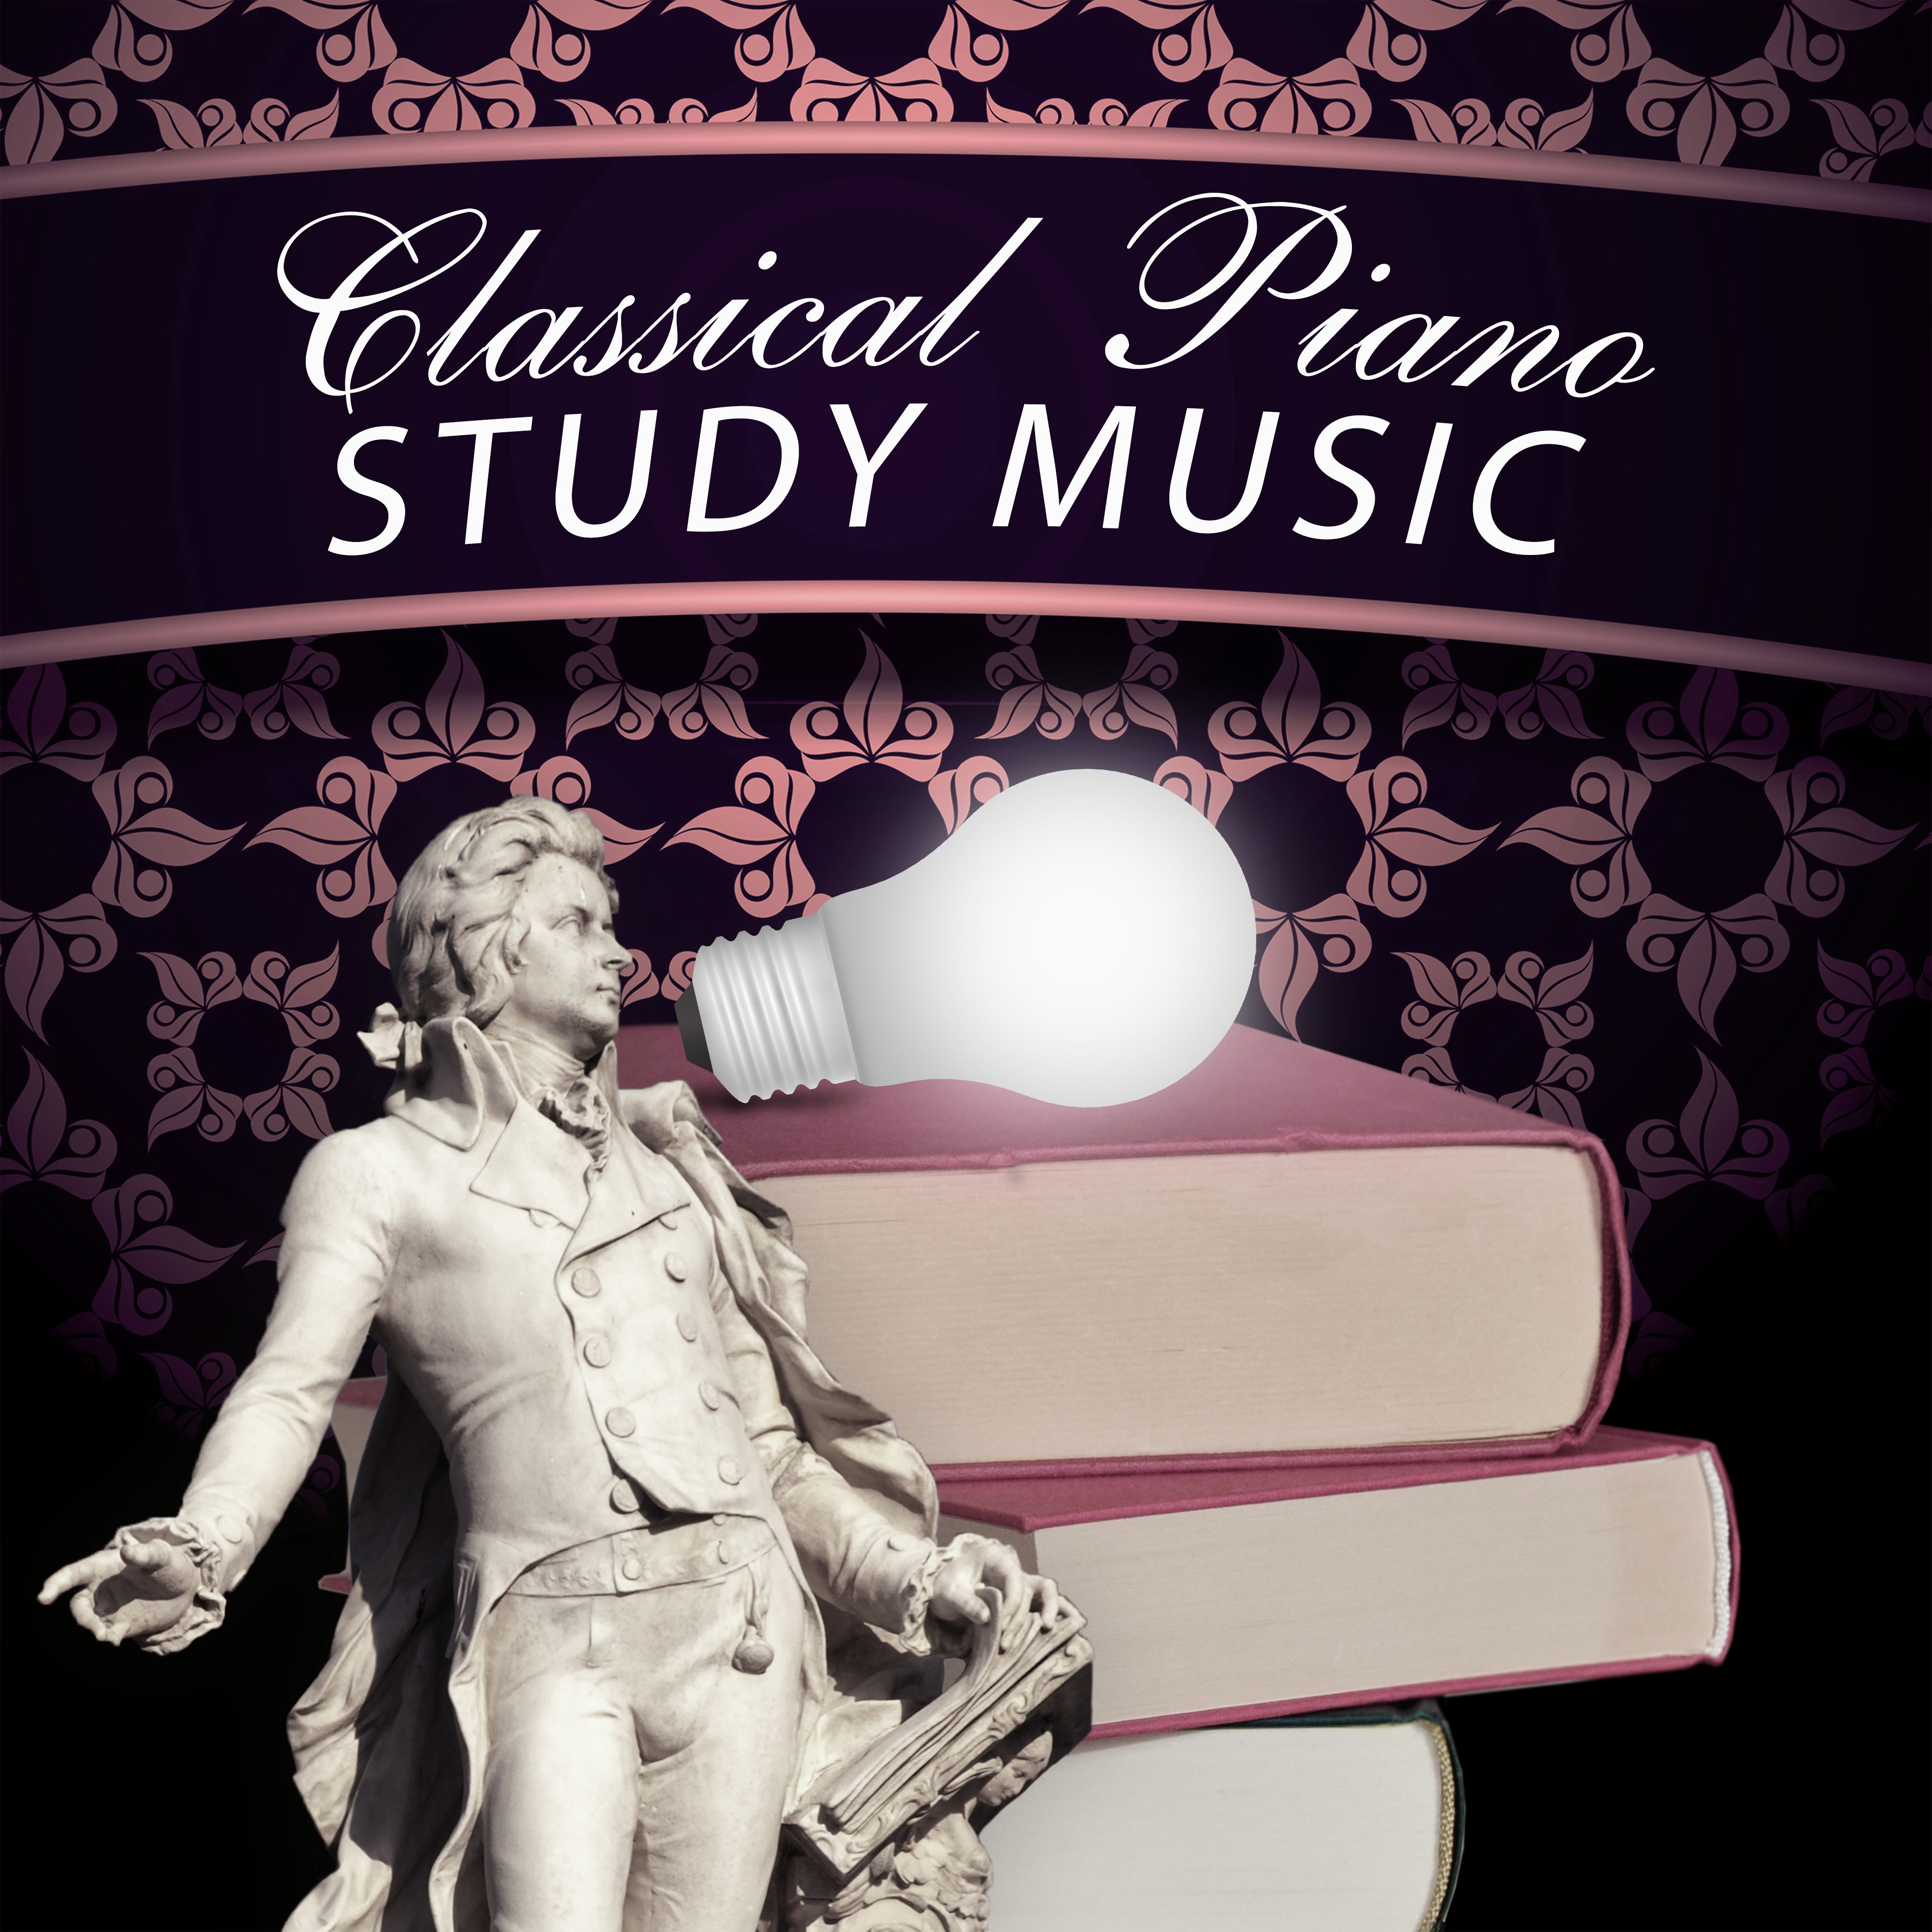 Classical Piano Study Music  Relaxing Study and Reading Classics, Bach to Work, Effective Study, Mozart, Beethoven